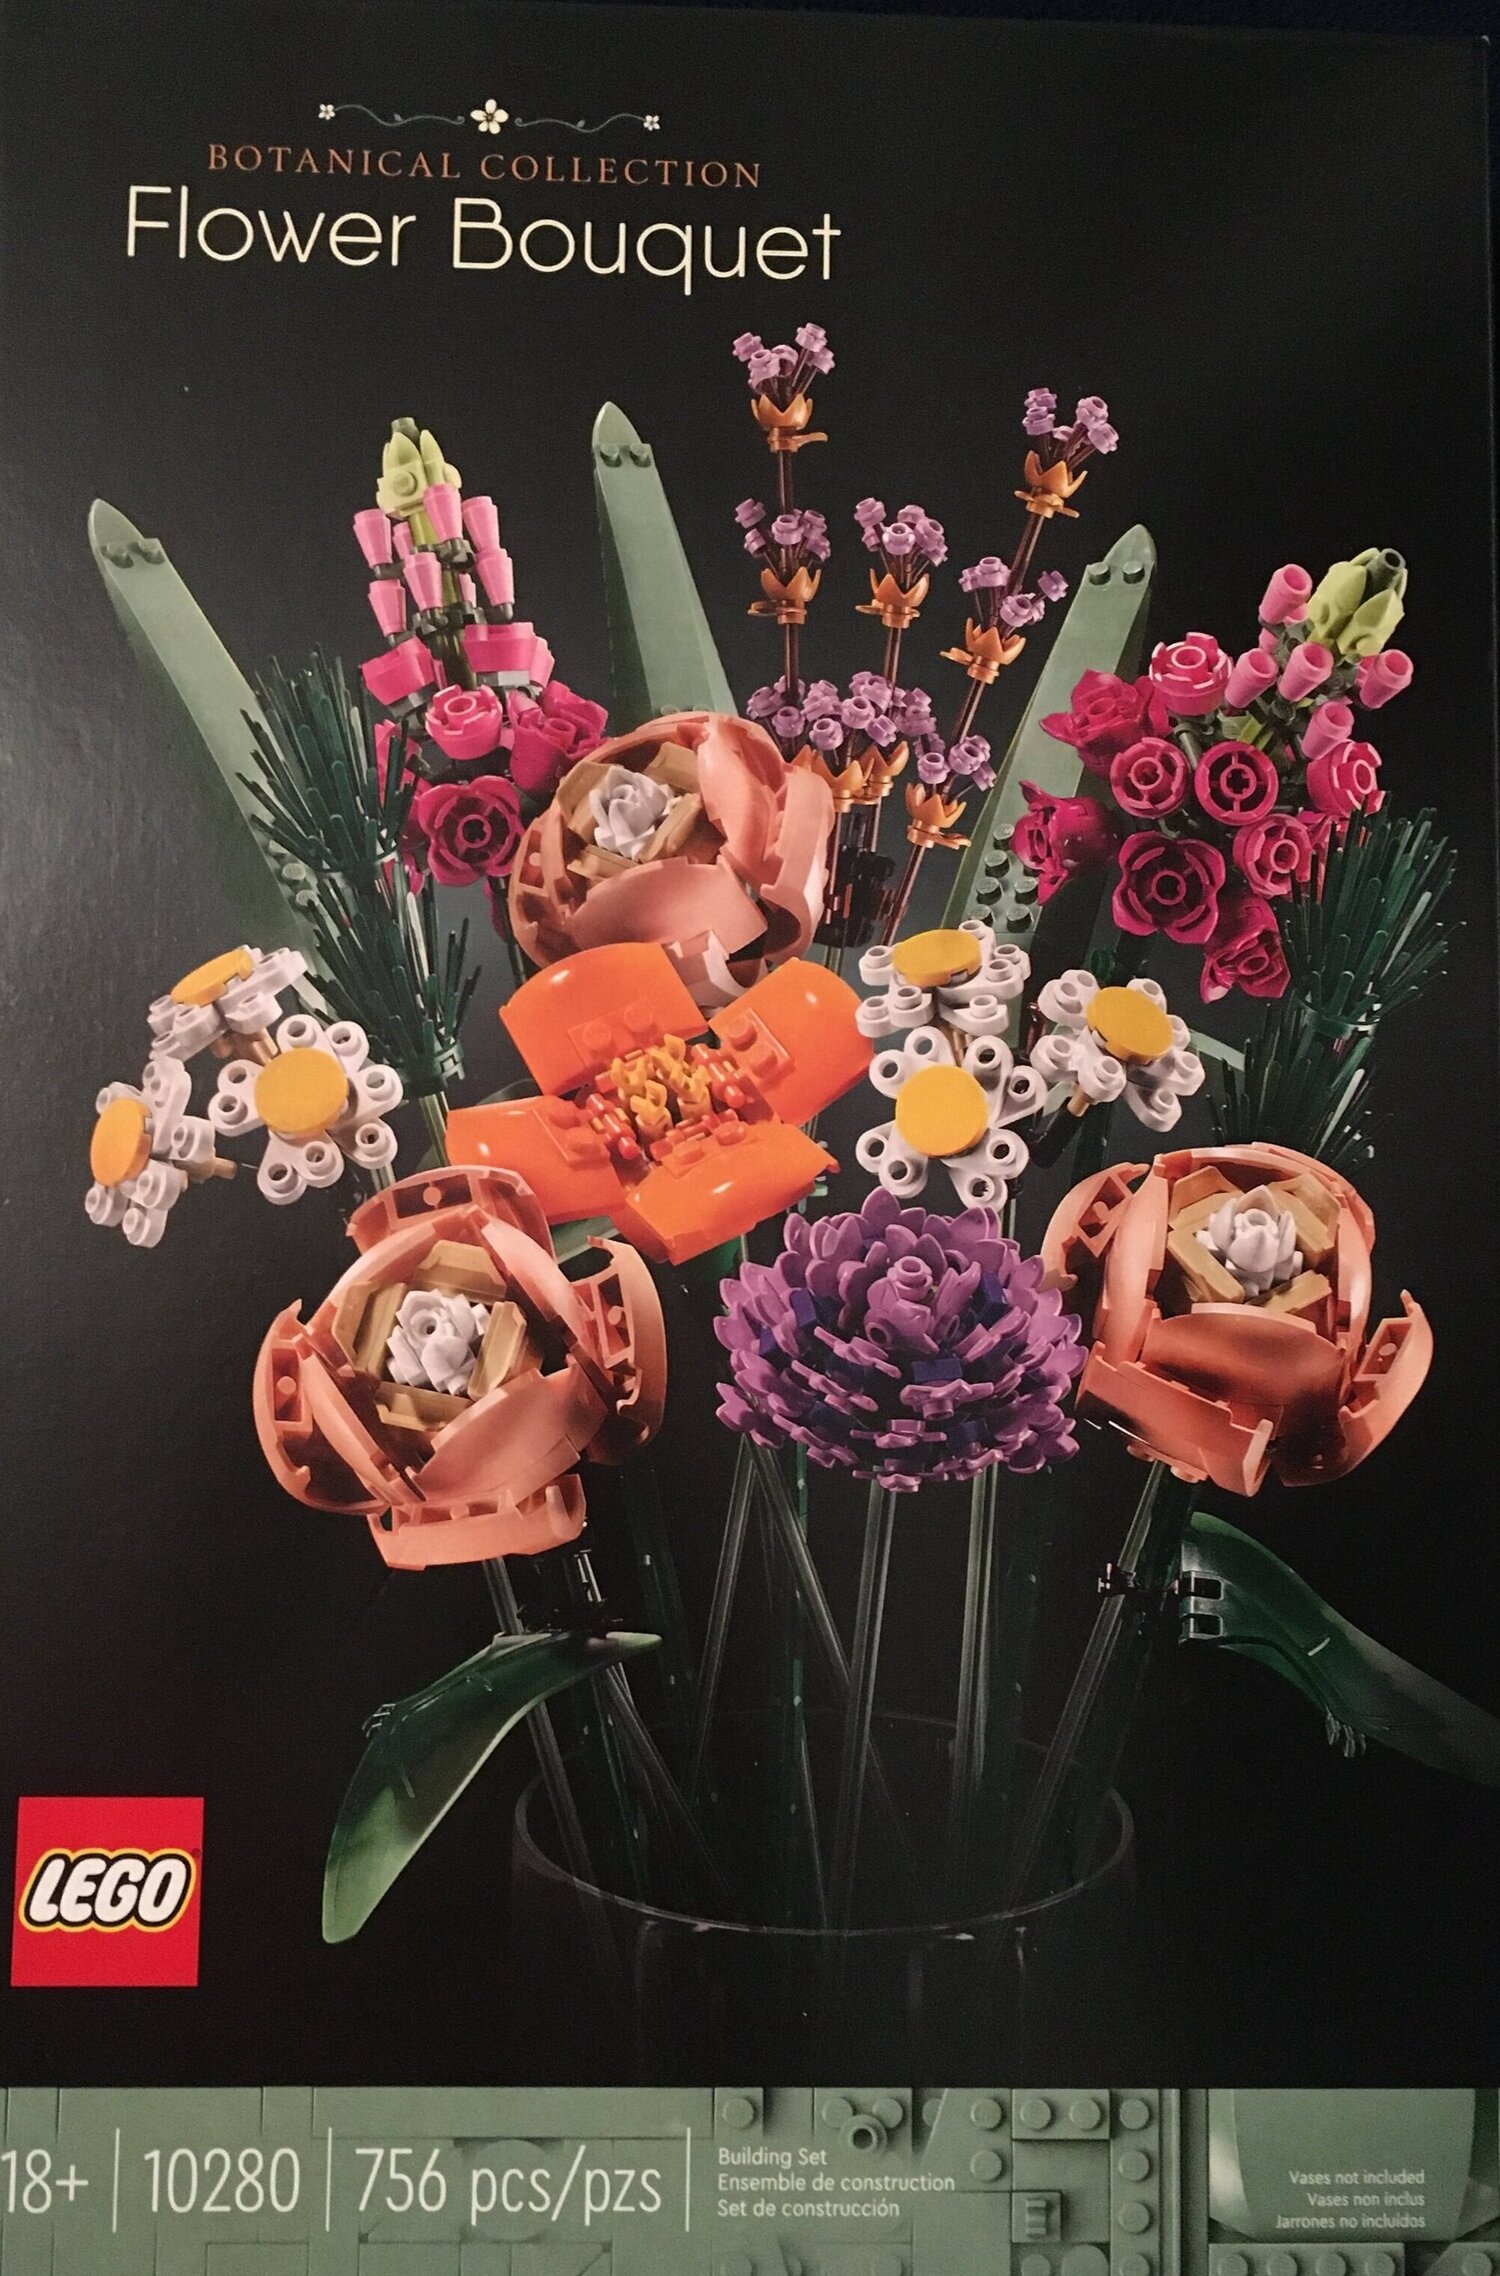 LEGO 10280 Flower Bouquet from the Botanical Collection [Review